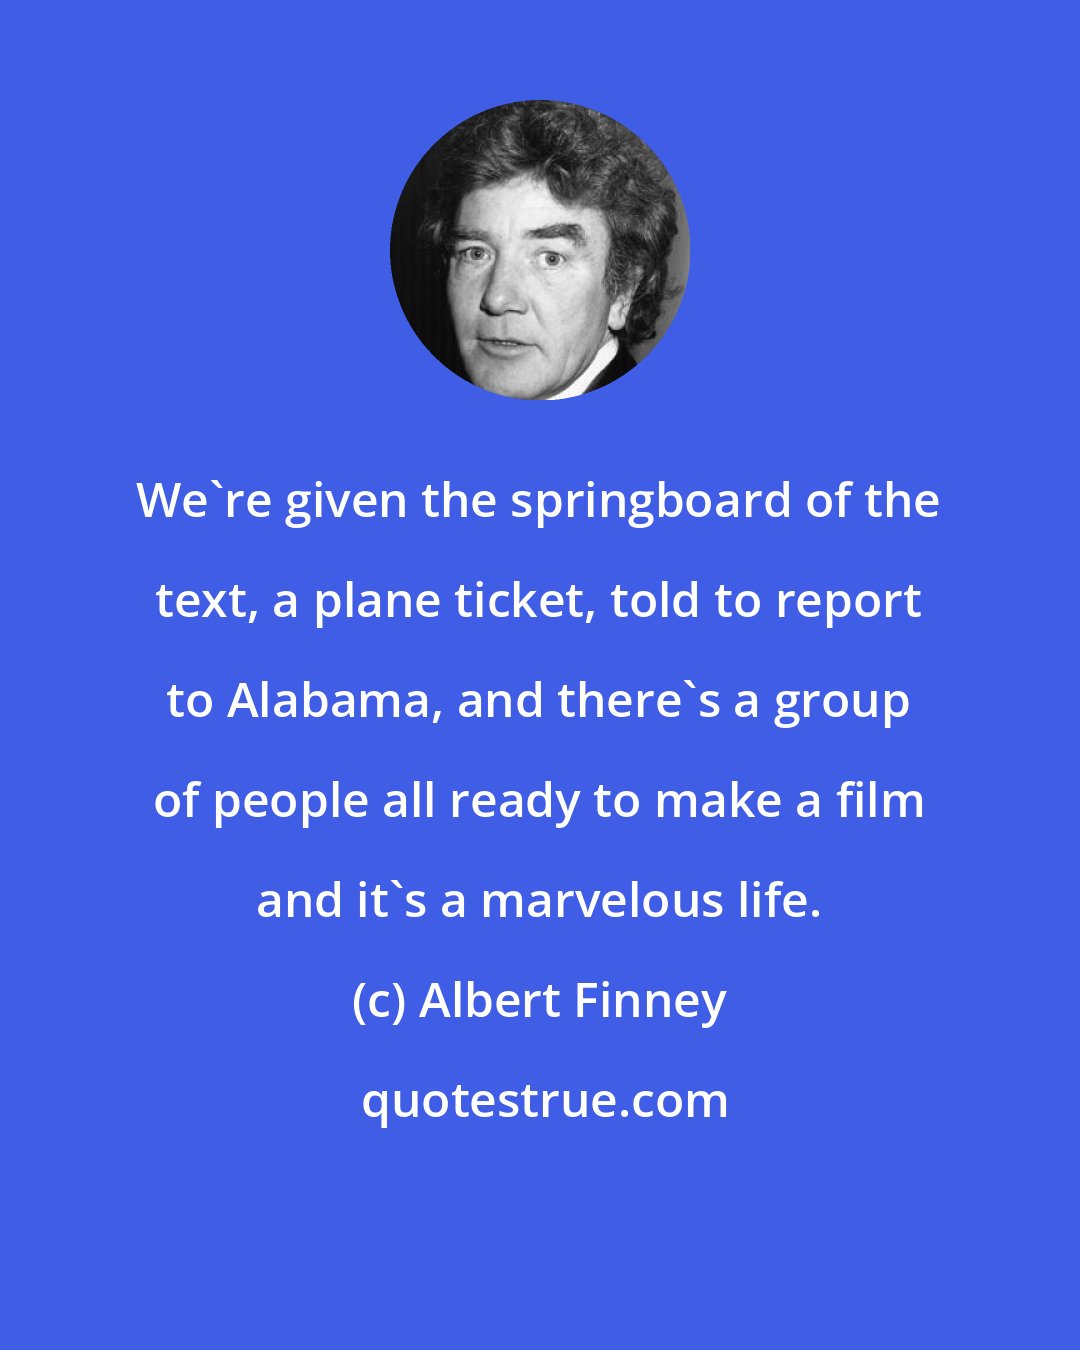 Albert Finney: We're given the springboard of the text, a plane ticket, told to report to Alabama, and there's a group of people all ready to make a film and it's a marvelous life.